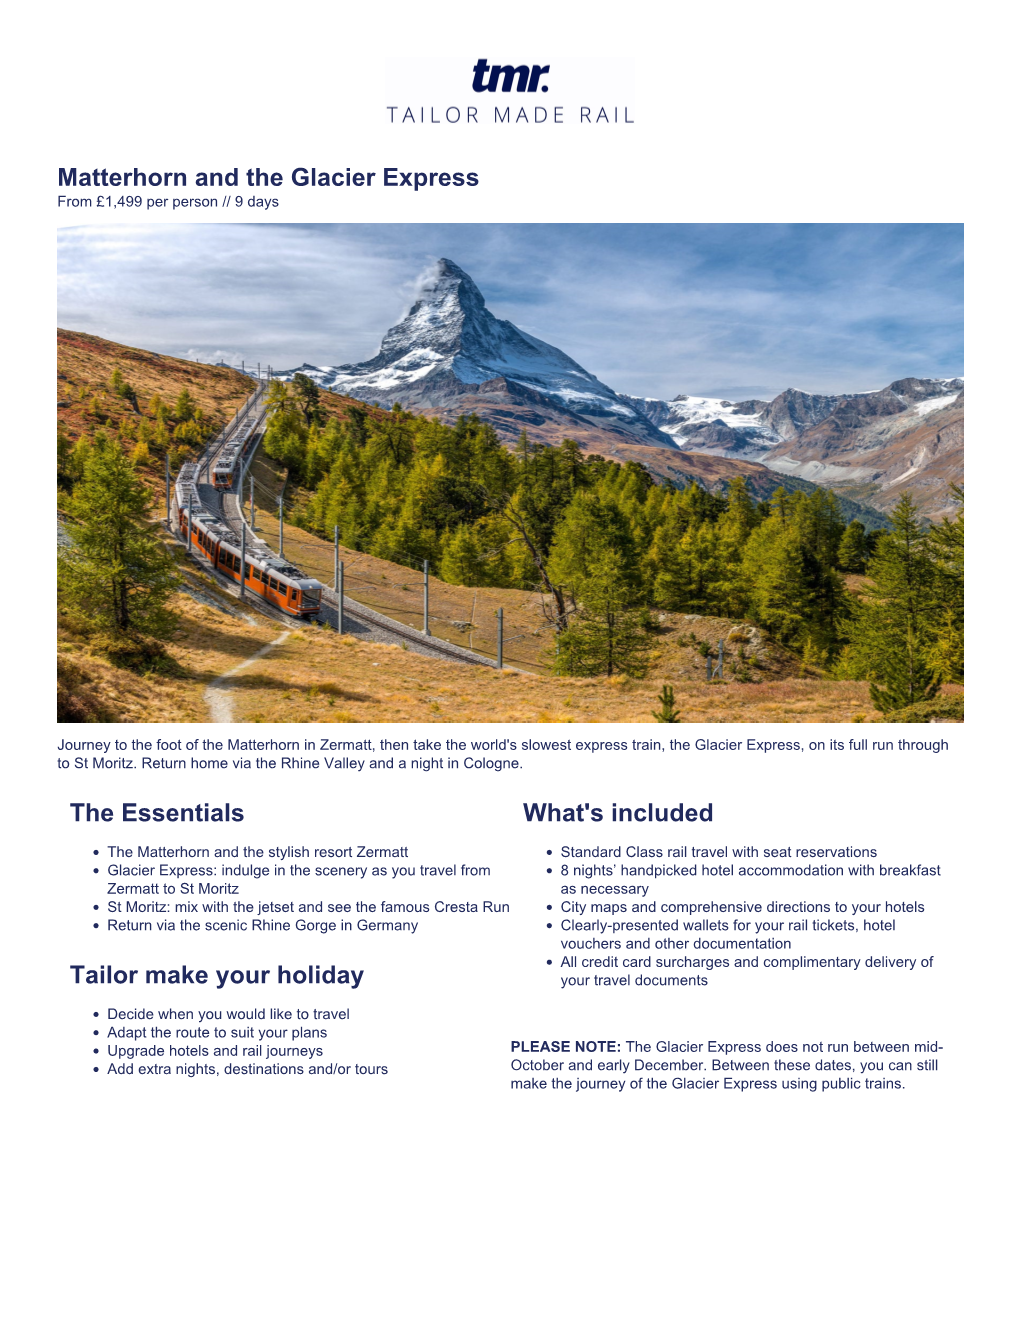 Matterhorn and the Glacier Express from £1,499 Per Person // 9 Days